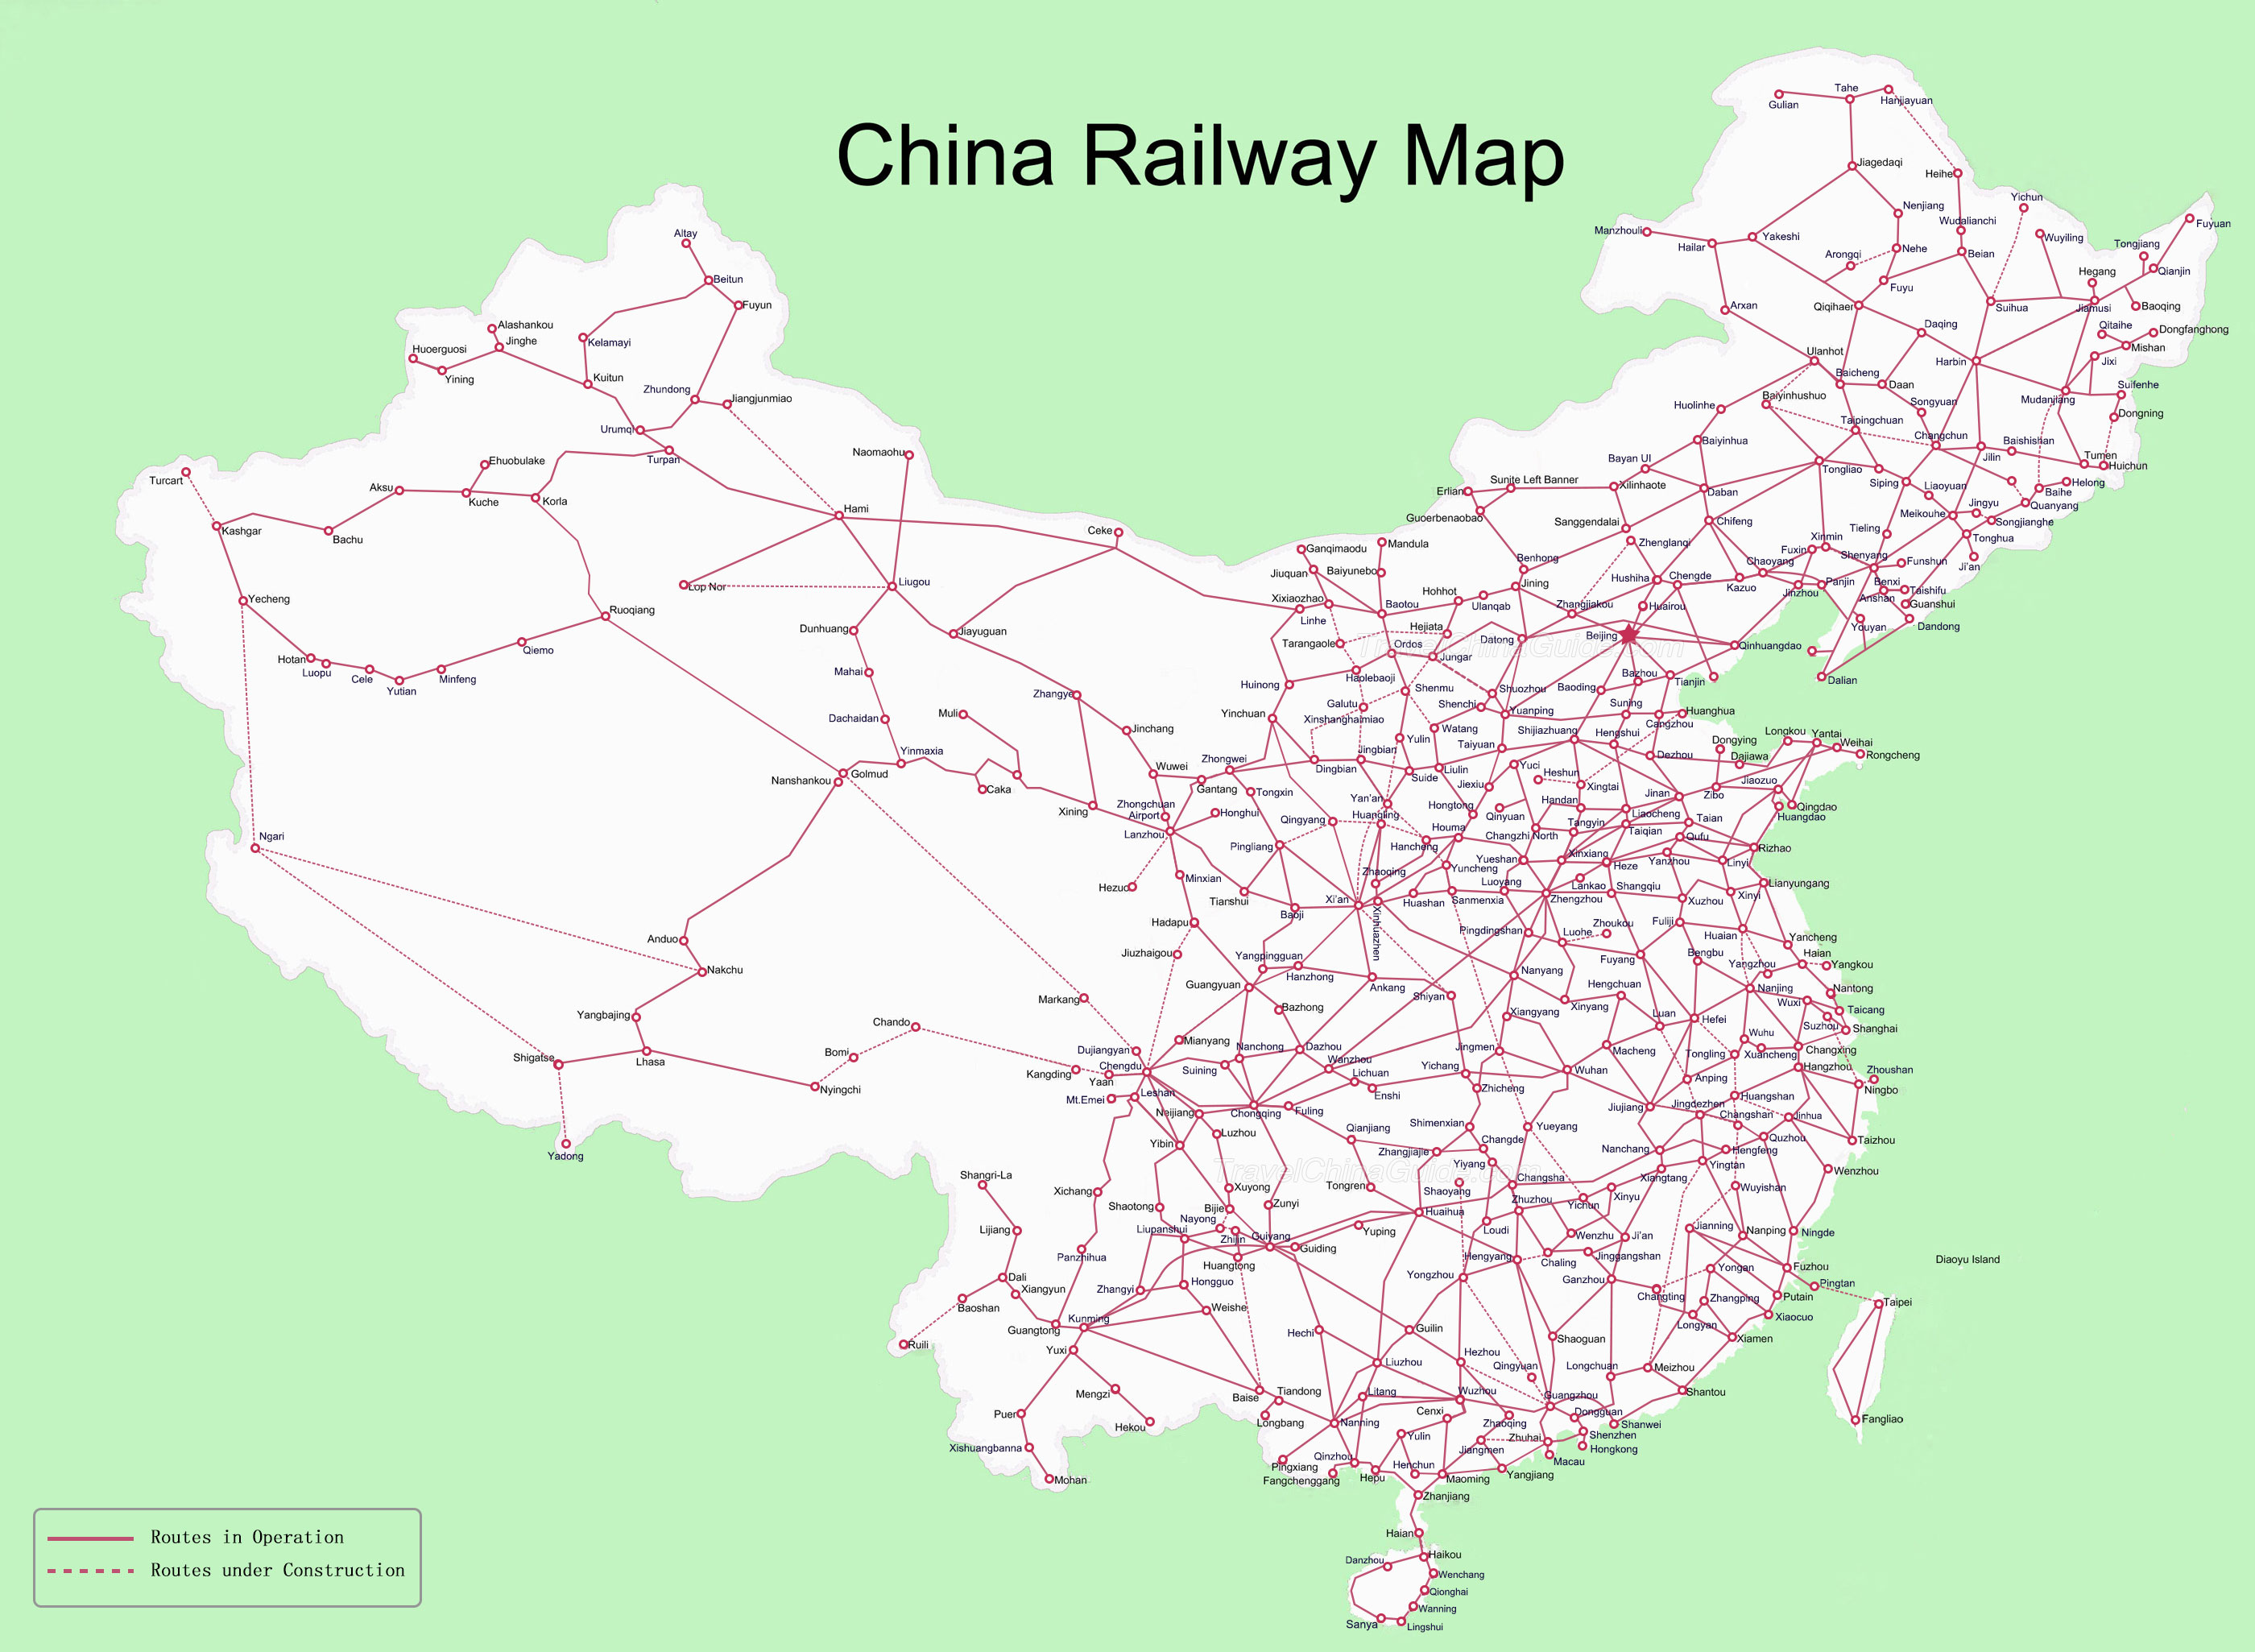 Indian Railway Route Chart